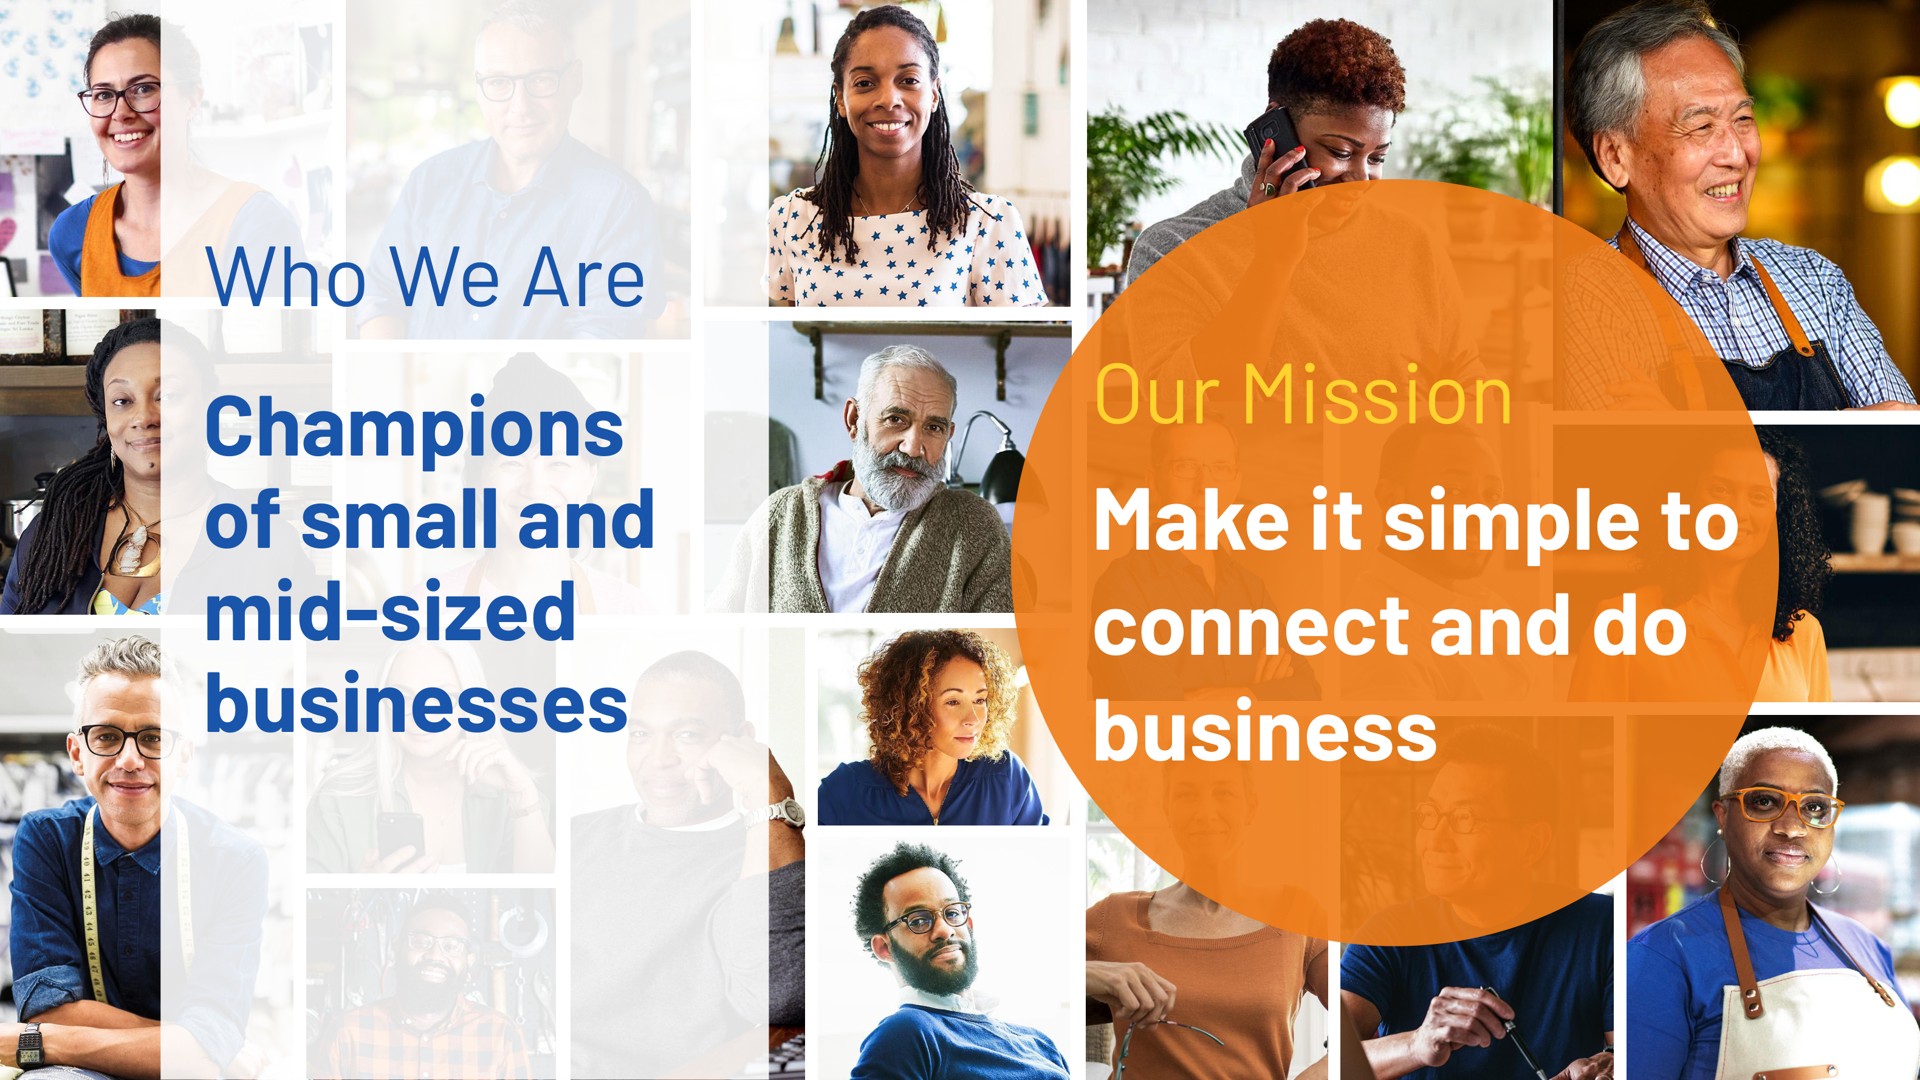 who we are champions of small and mid sized businesses our mission make it simple to connect and do business mae tint ree by | Bill.com